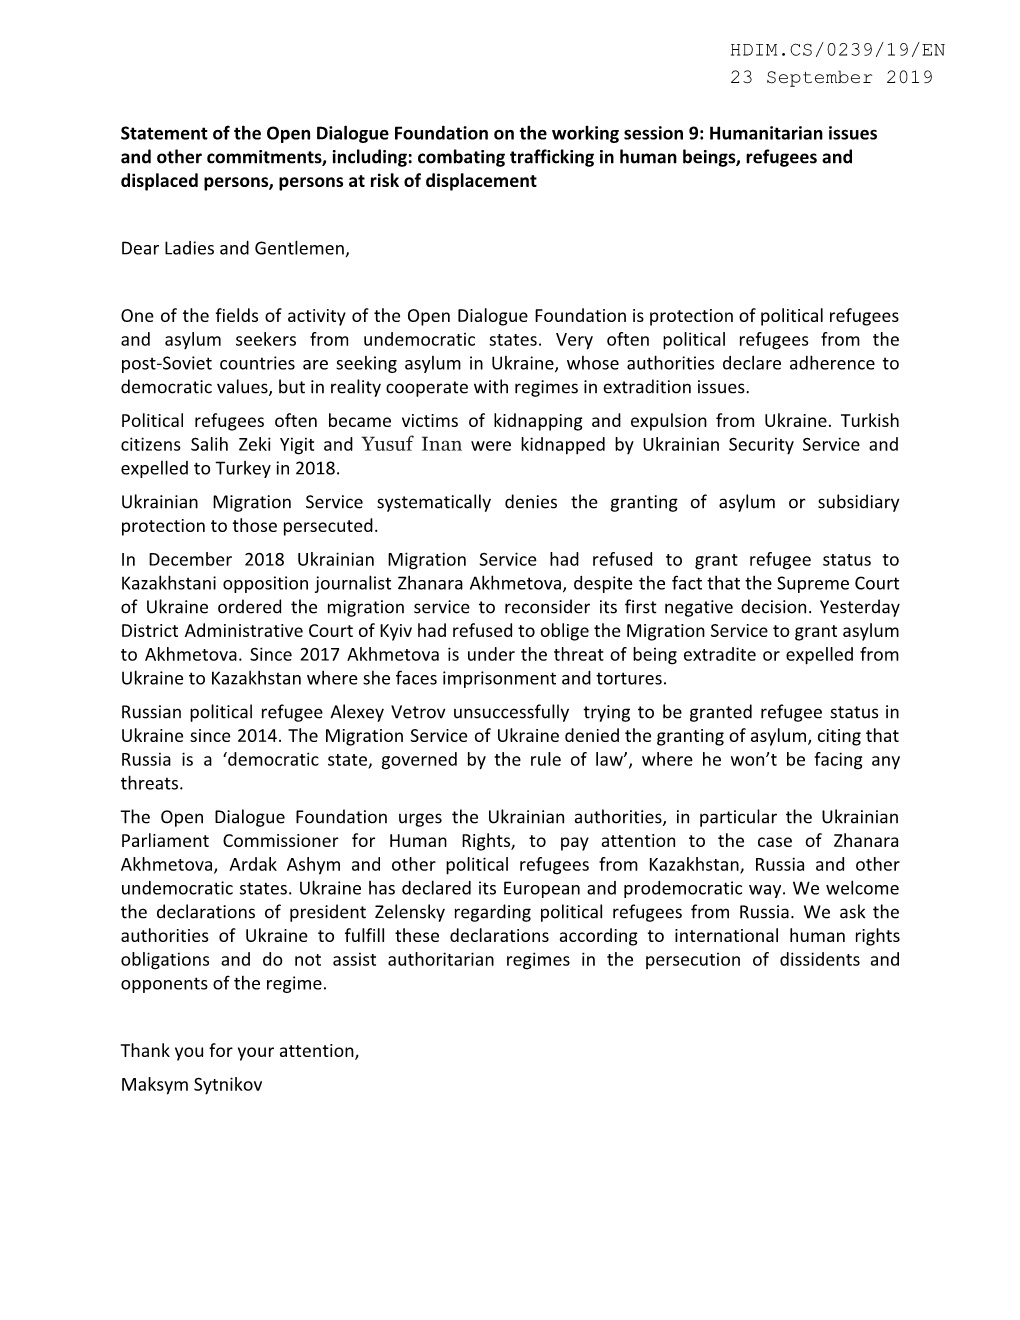 Statement of the Open Dialogue Foundation on the Working Session 9: Humanitarian Issues and Other Commitments, Including